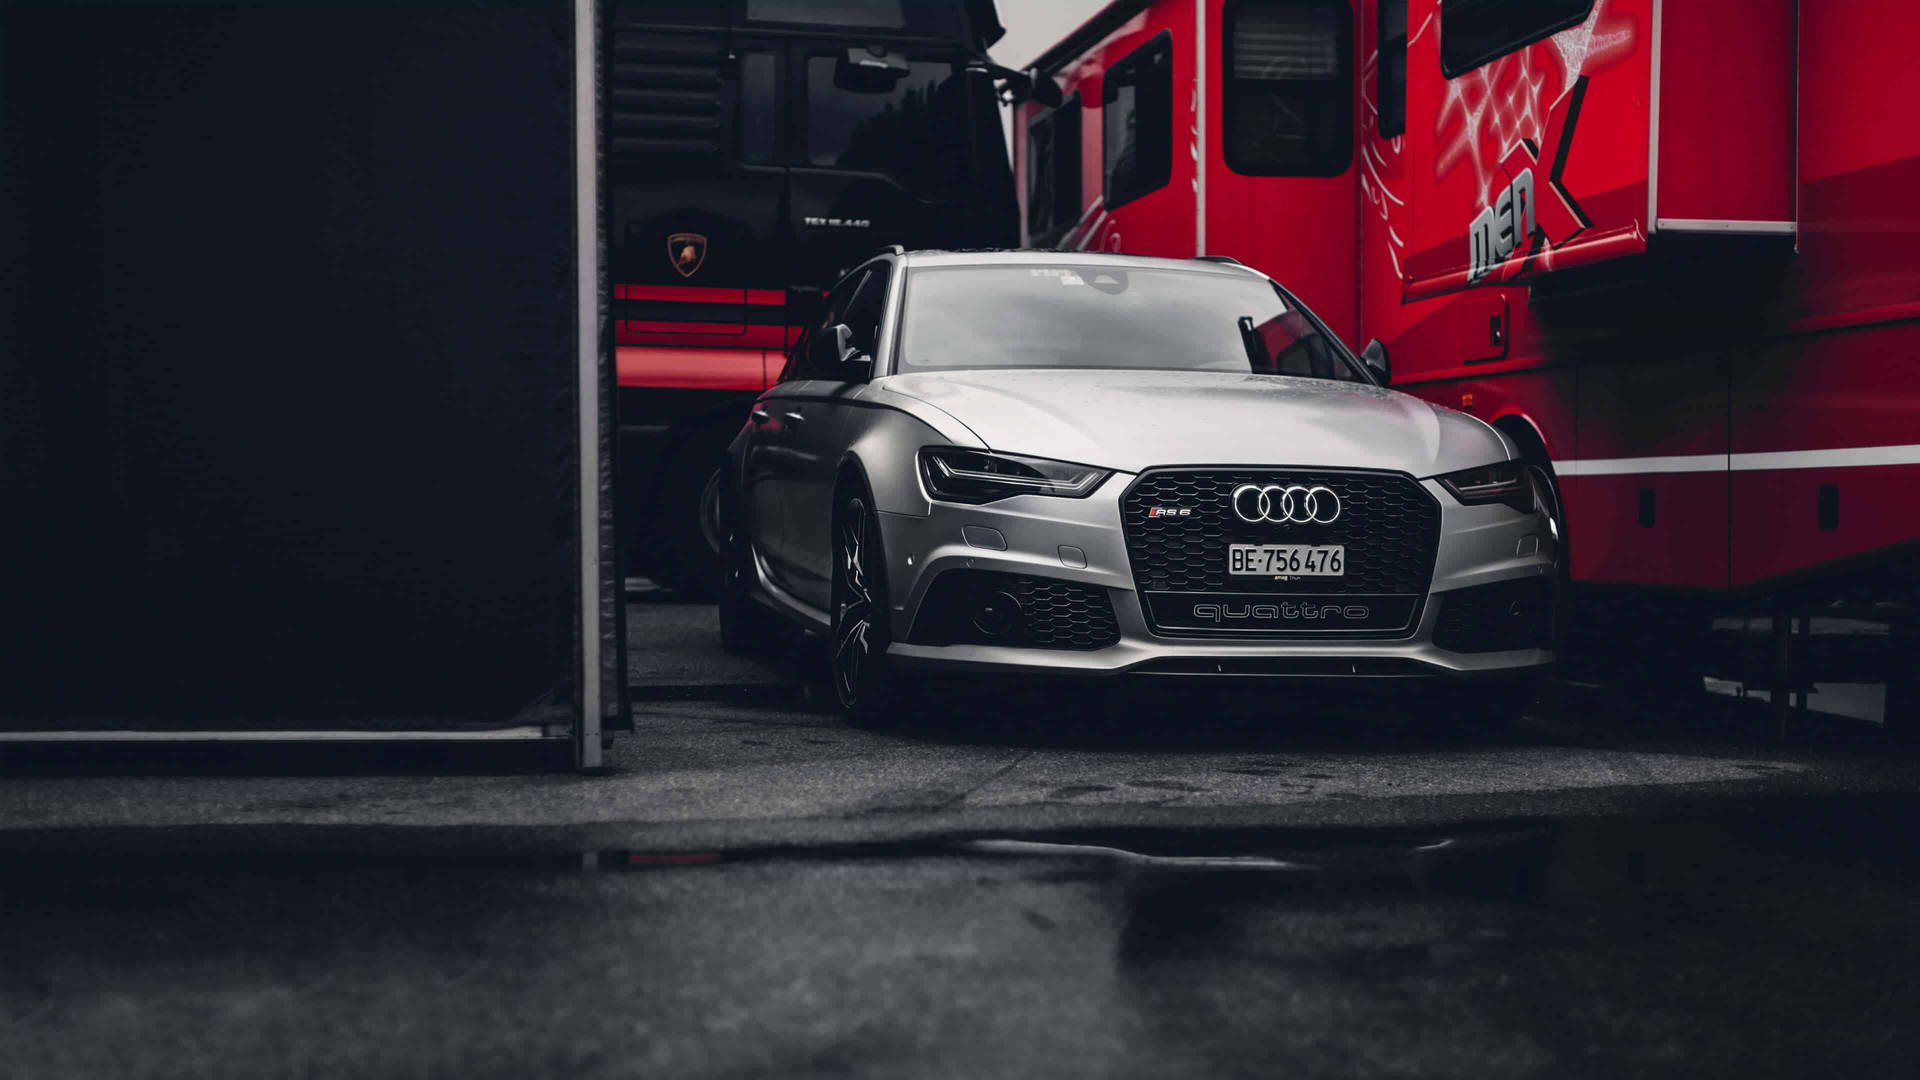 Caption: Stunning Silver Audi Rs 6 Unleashed